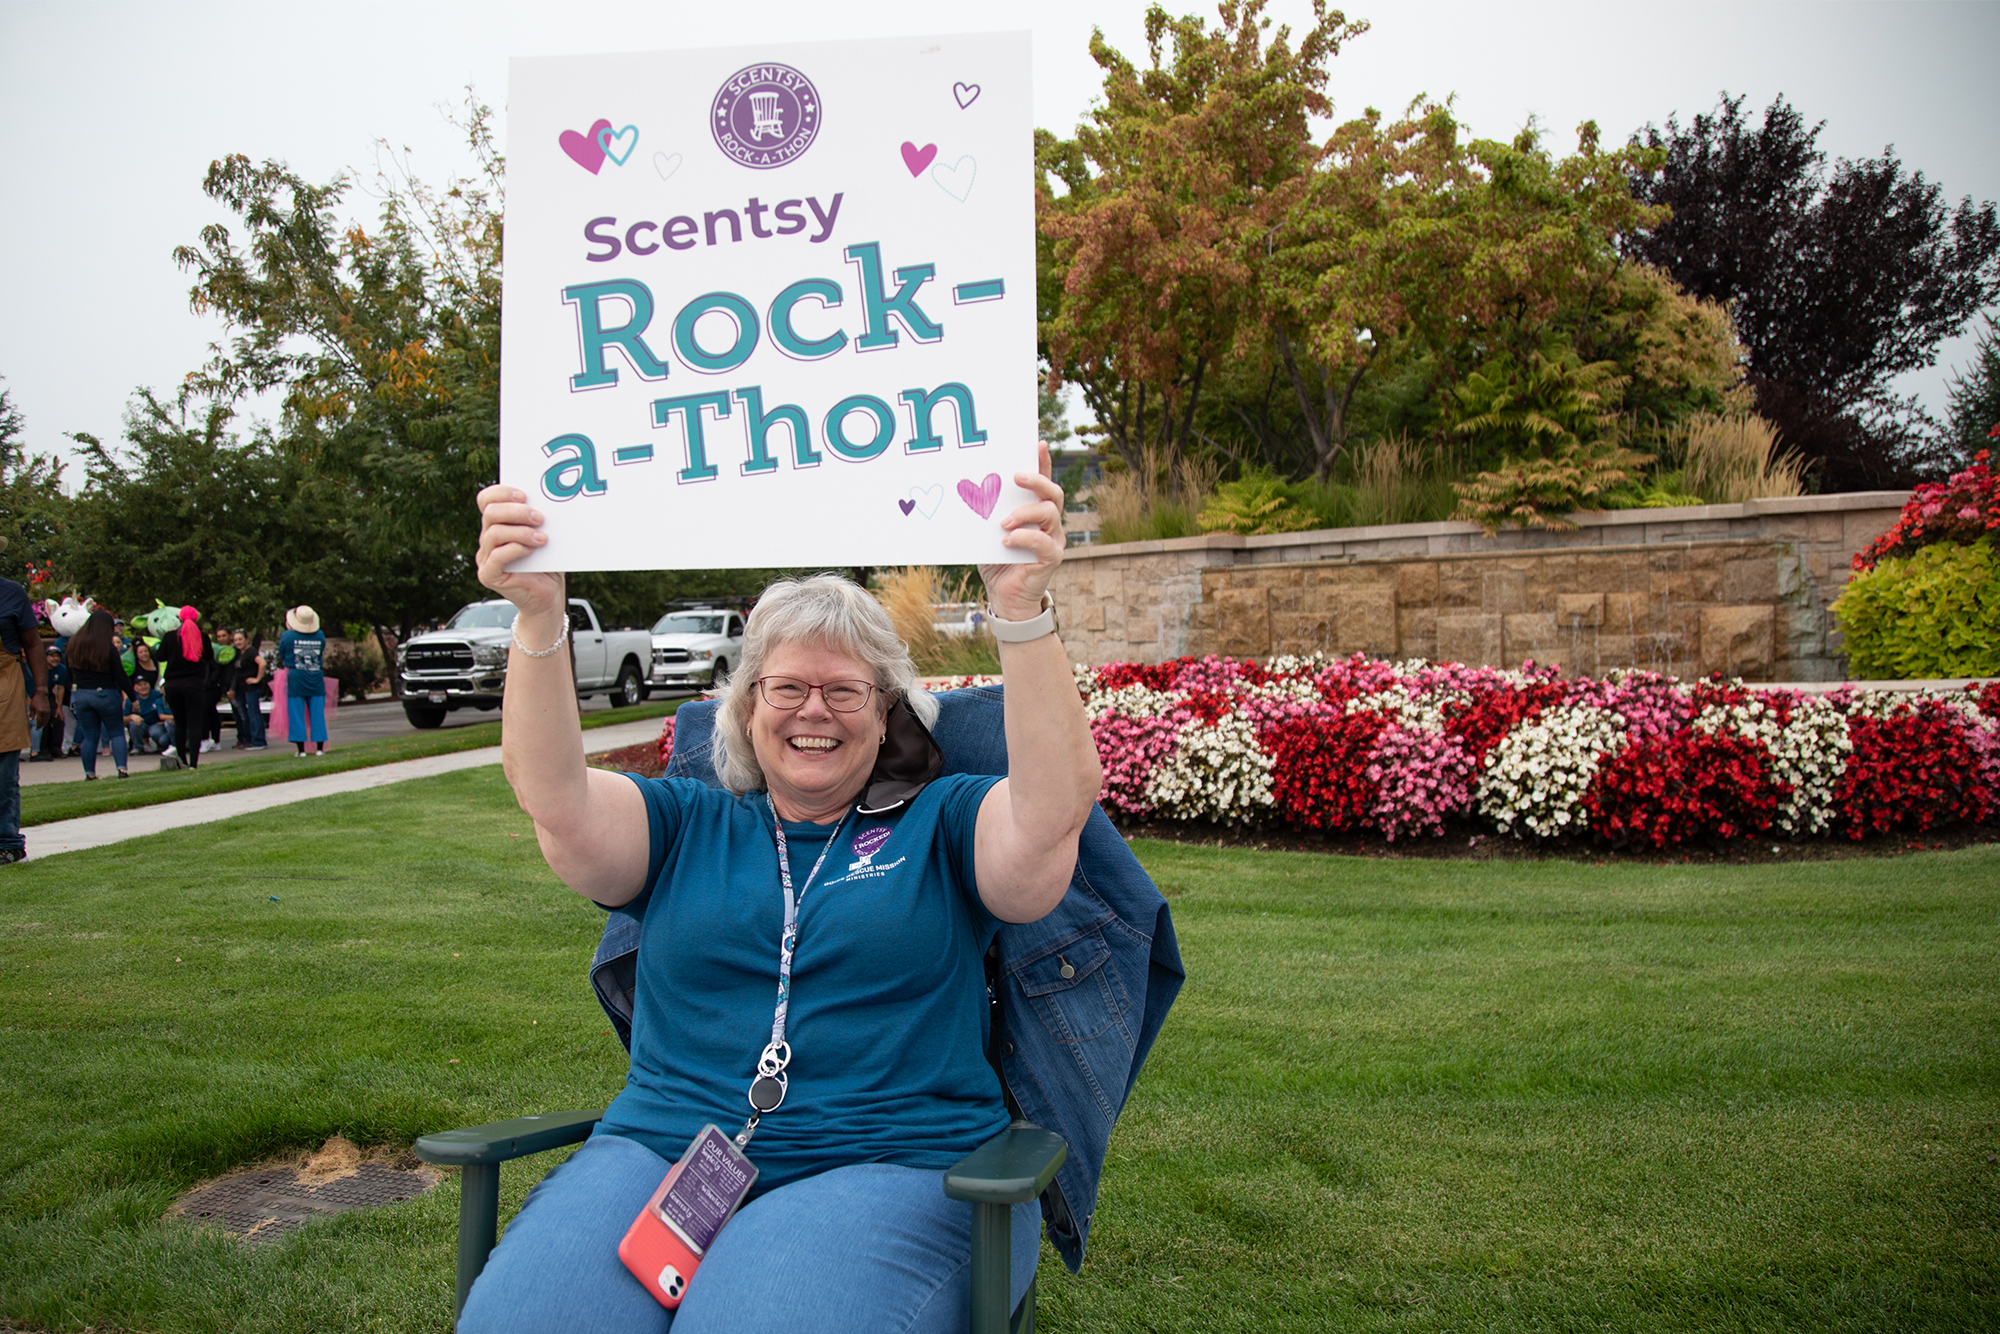 Scentsy Rock-a-Thon: Person rocking holding a sign